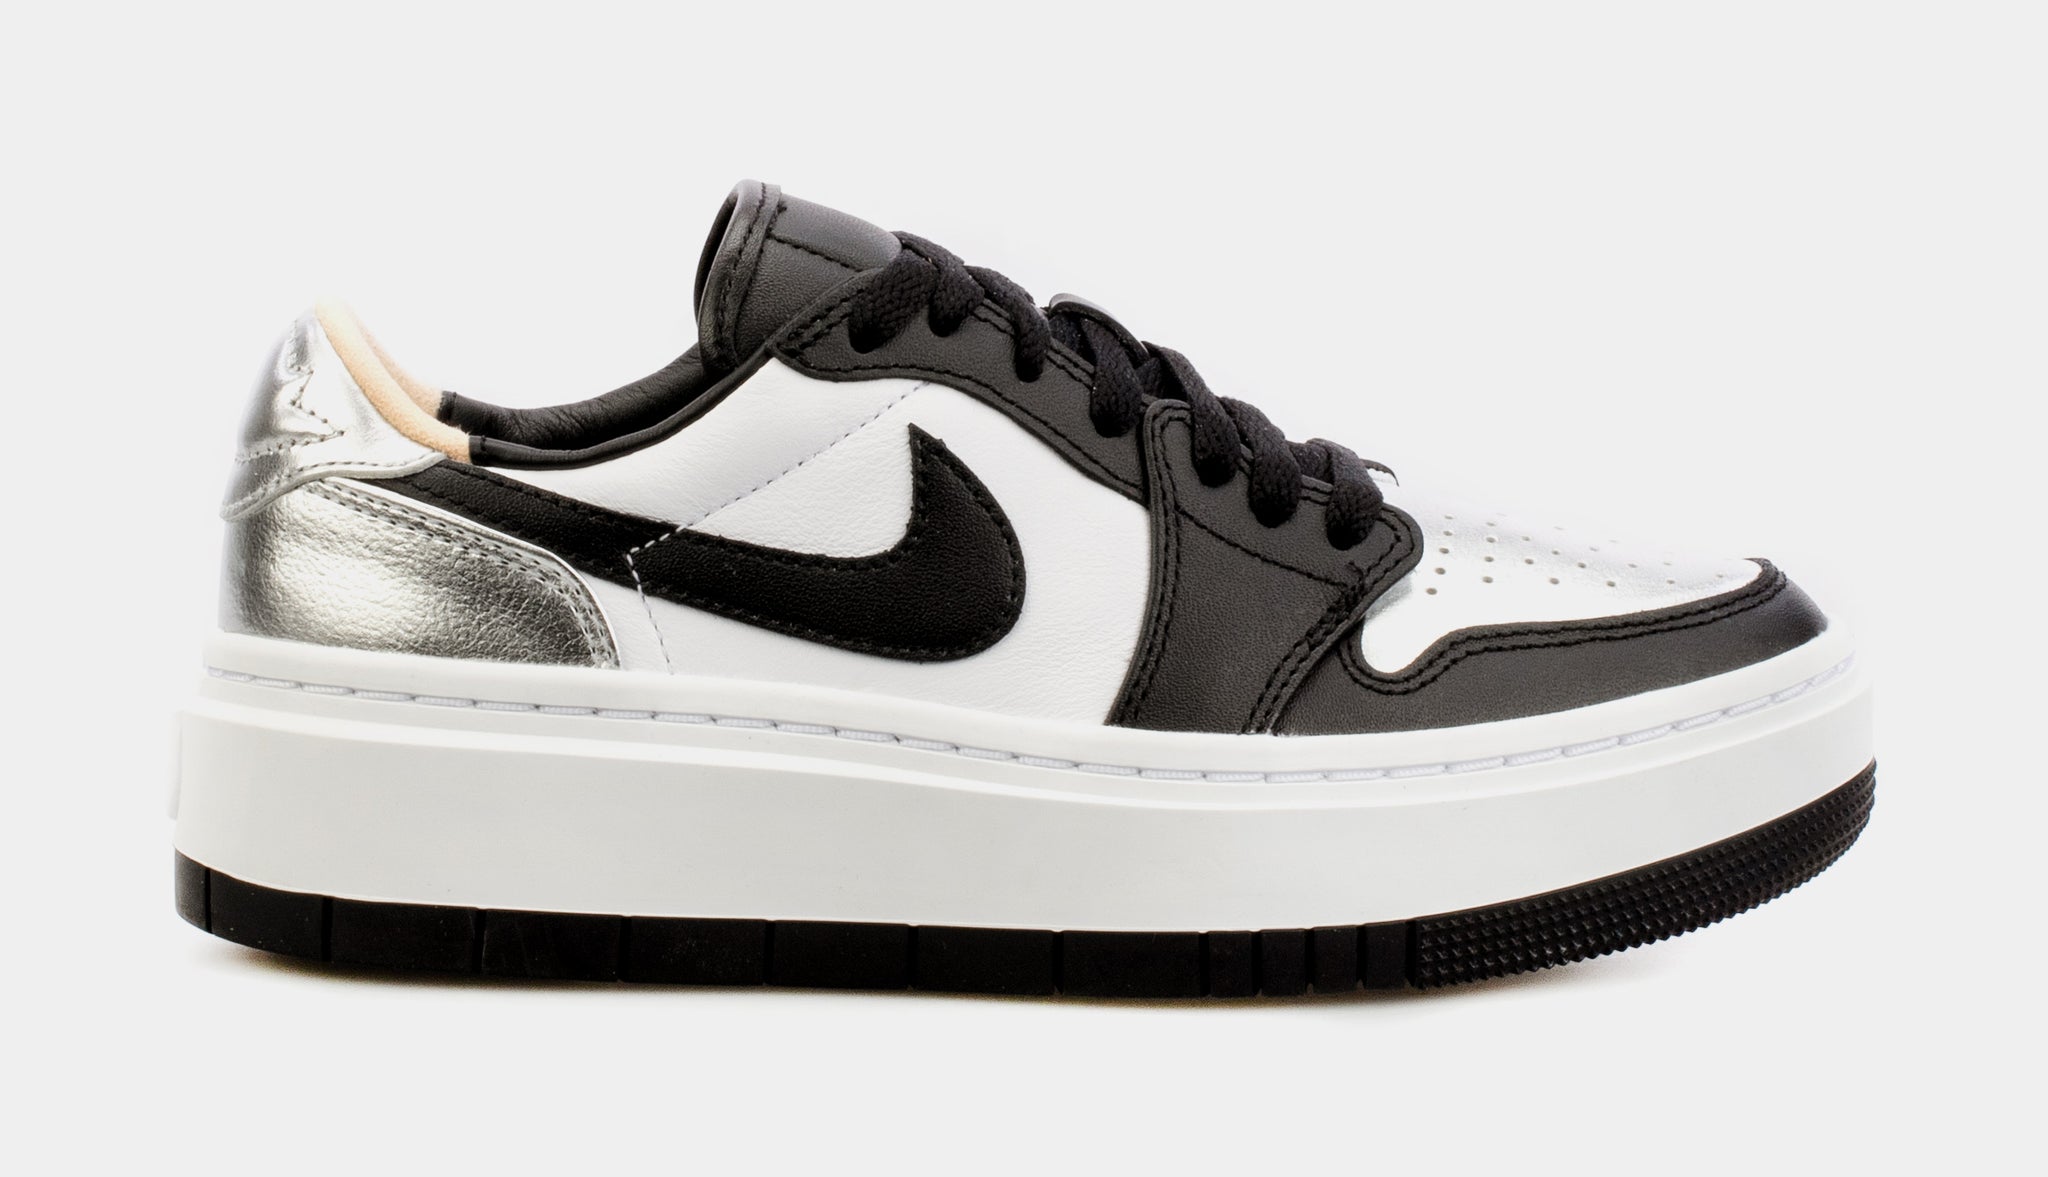 Air Jordan 1 Elevate Low Silver Toe Womens Lifestyle Shoes (Black/Grey)  Free Shipping